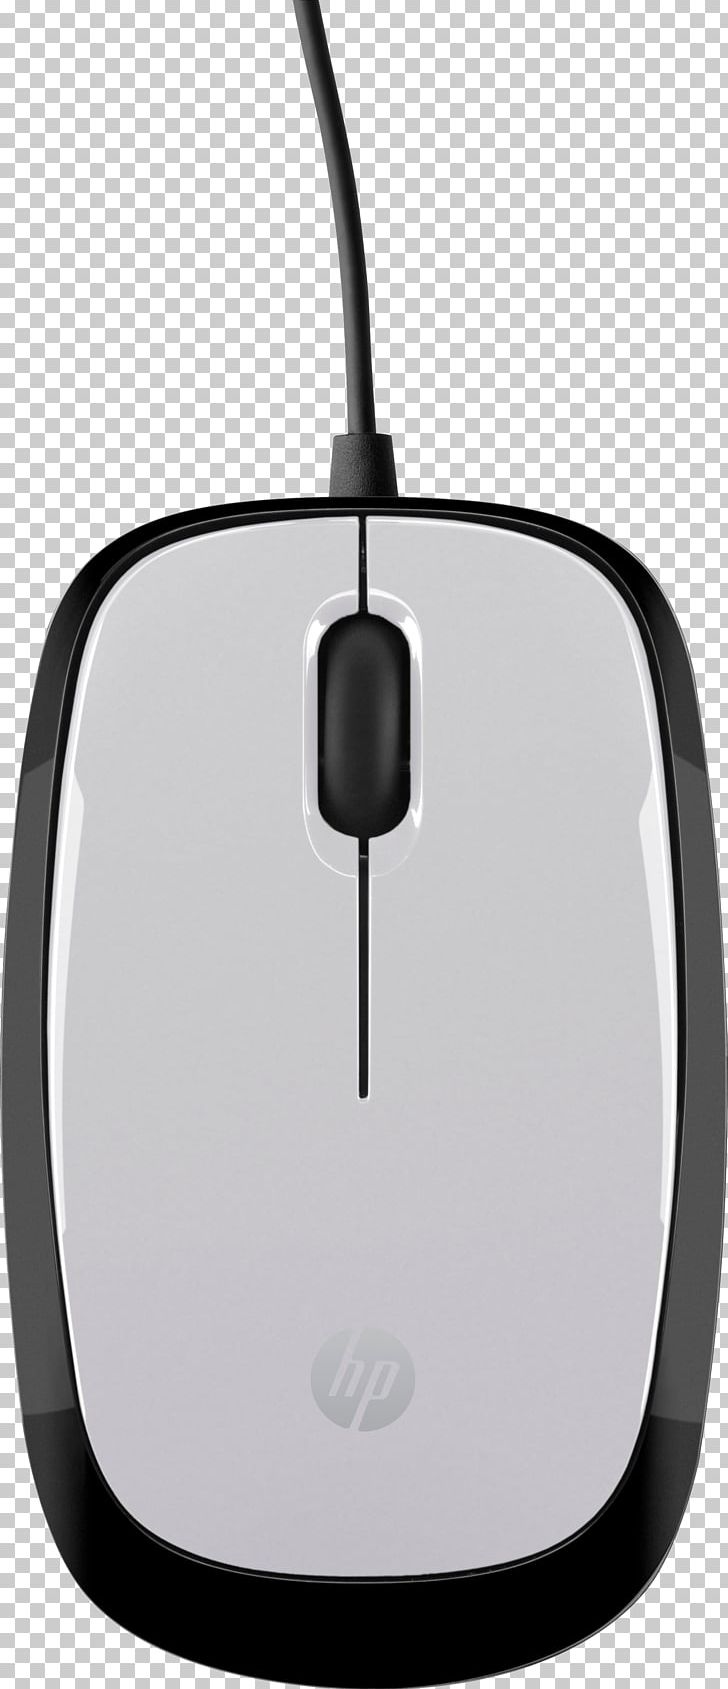 Computer Mouse Input Devices PNG, Clipart, Computer, Computer Accessory, Computer Component, Computer Hardware, Computer Mouse Free PNG Download